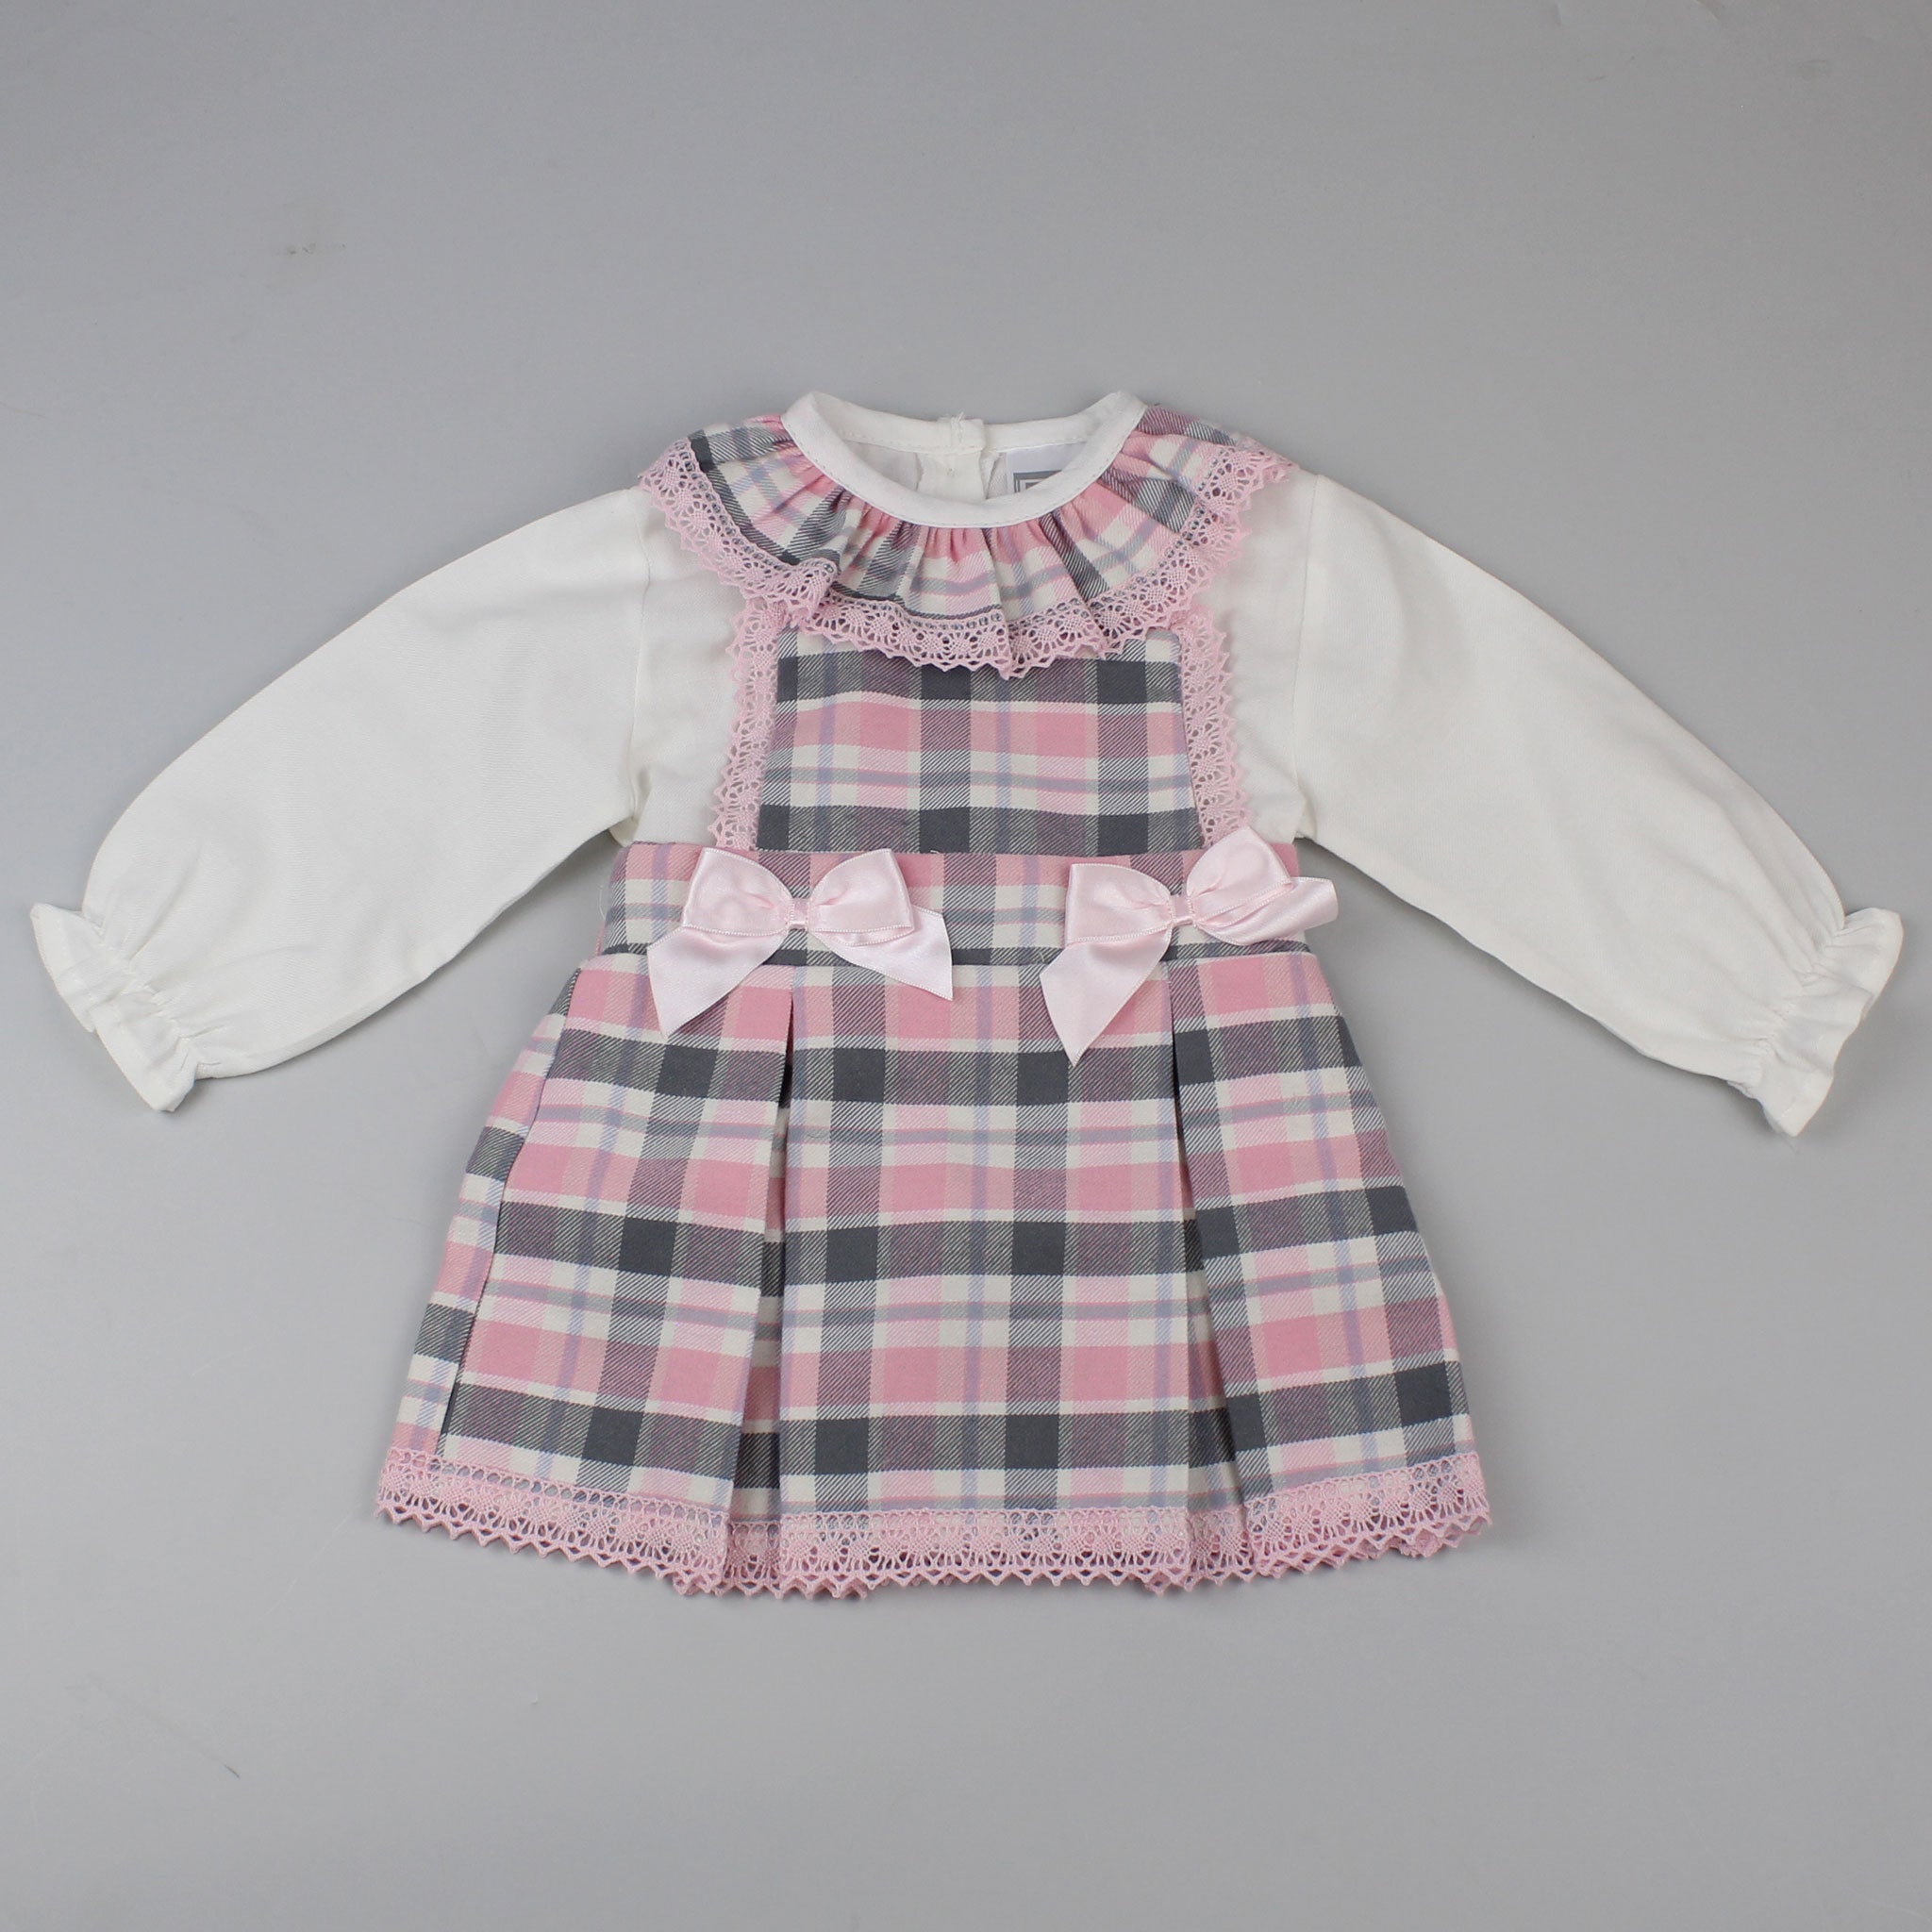 Pink Tartan Dress and Blouse - Baby Christmas Outfit - Pex Aisling